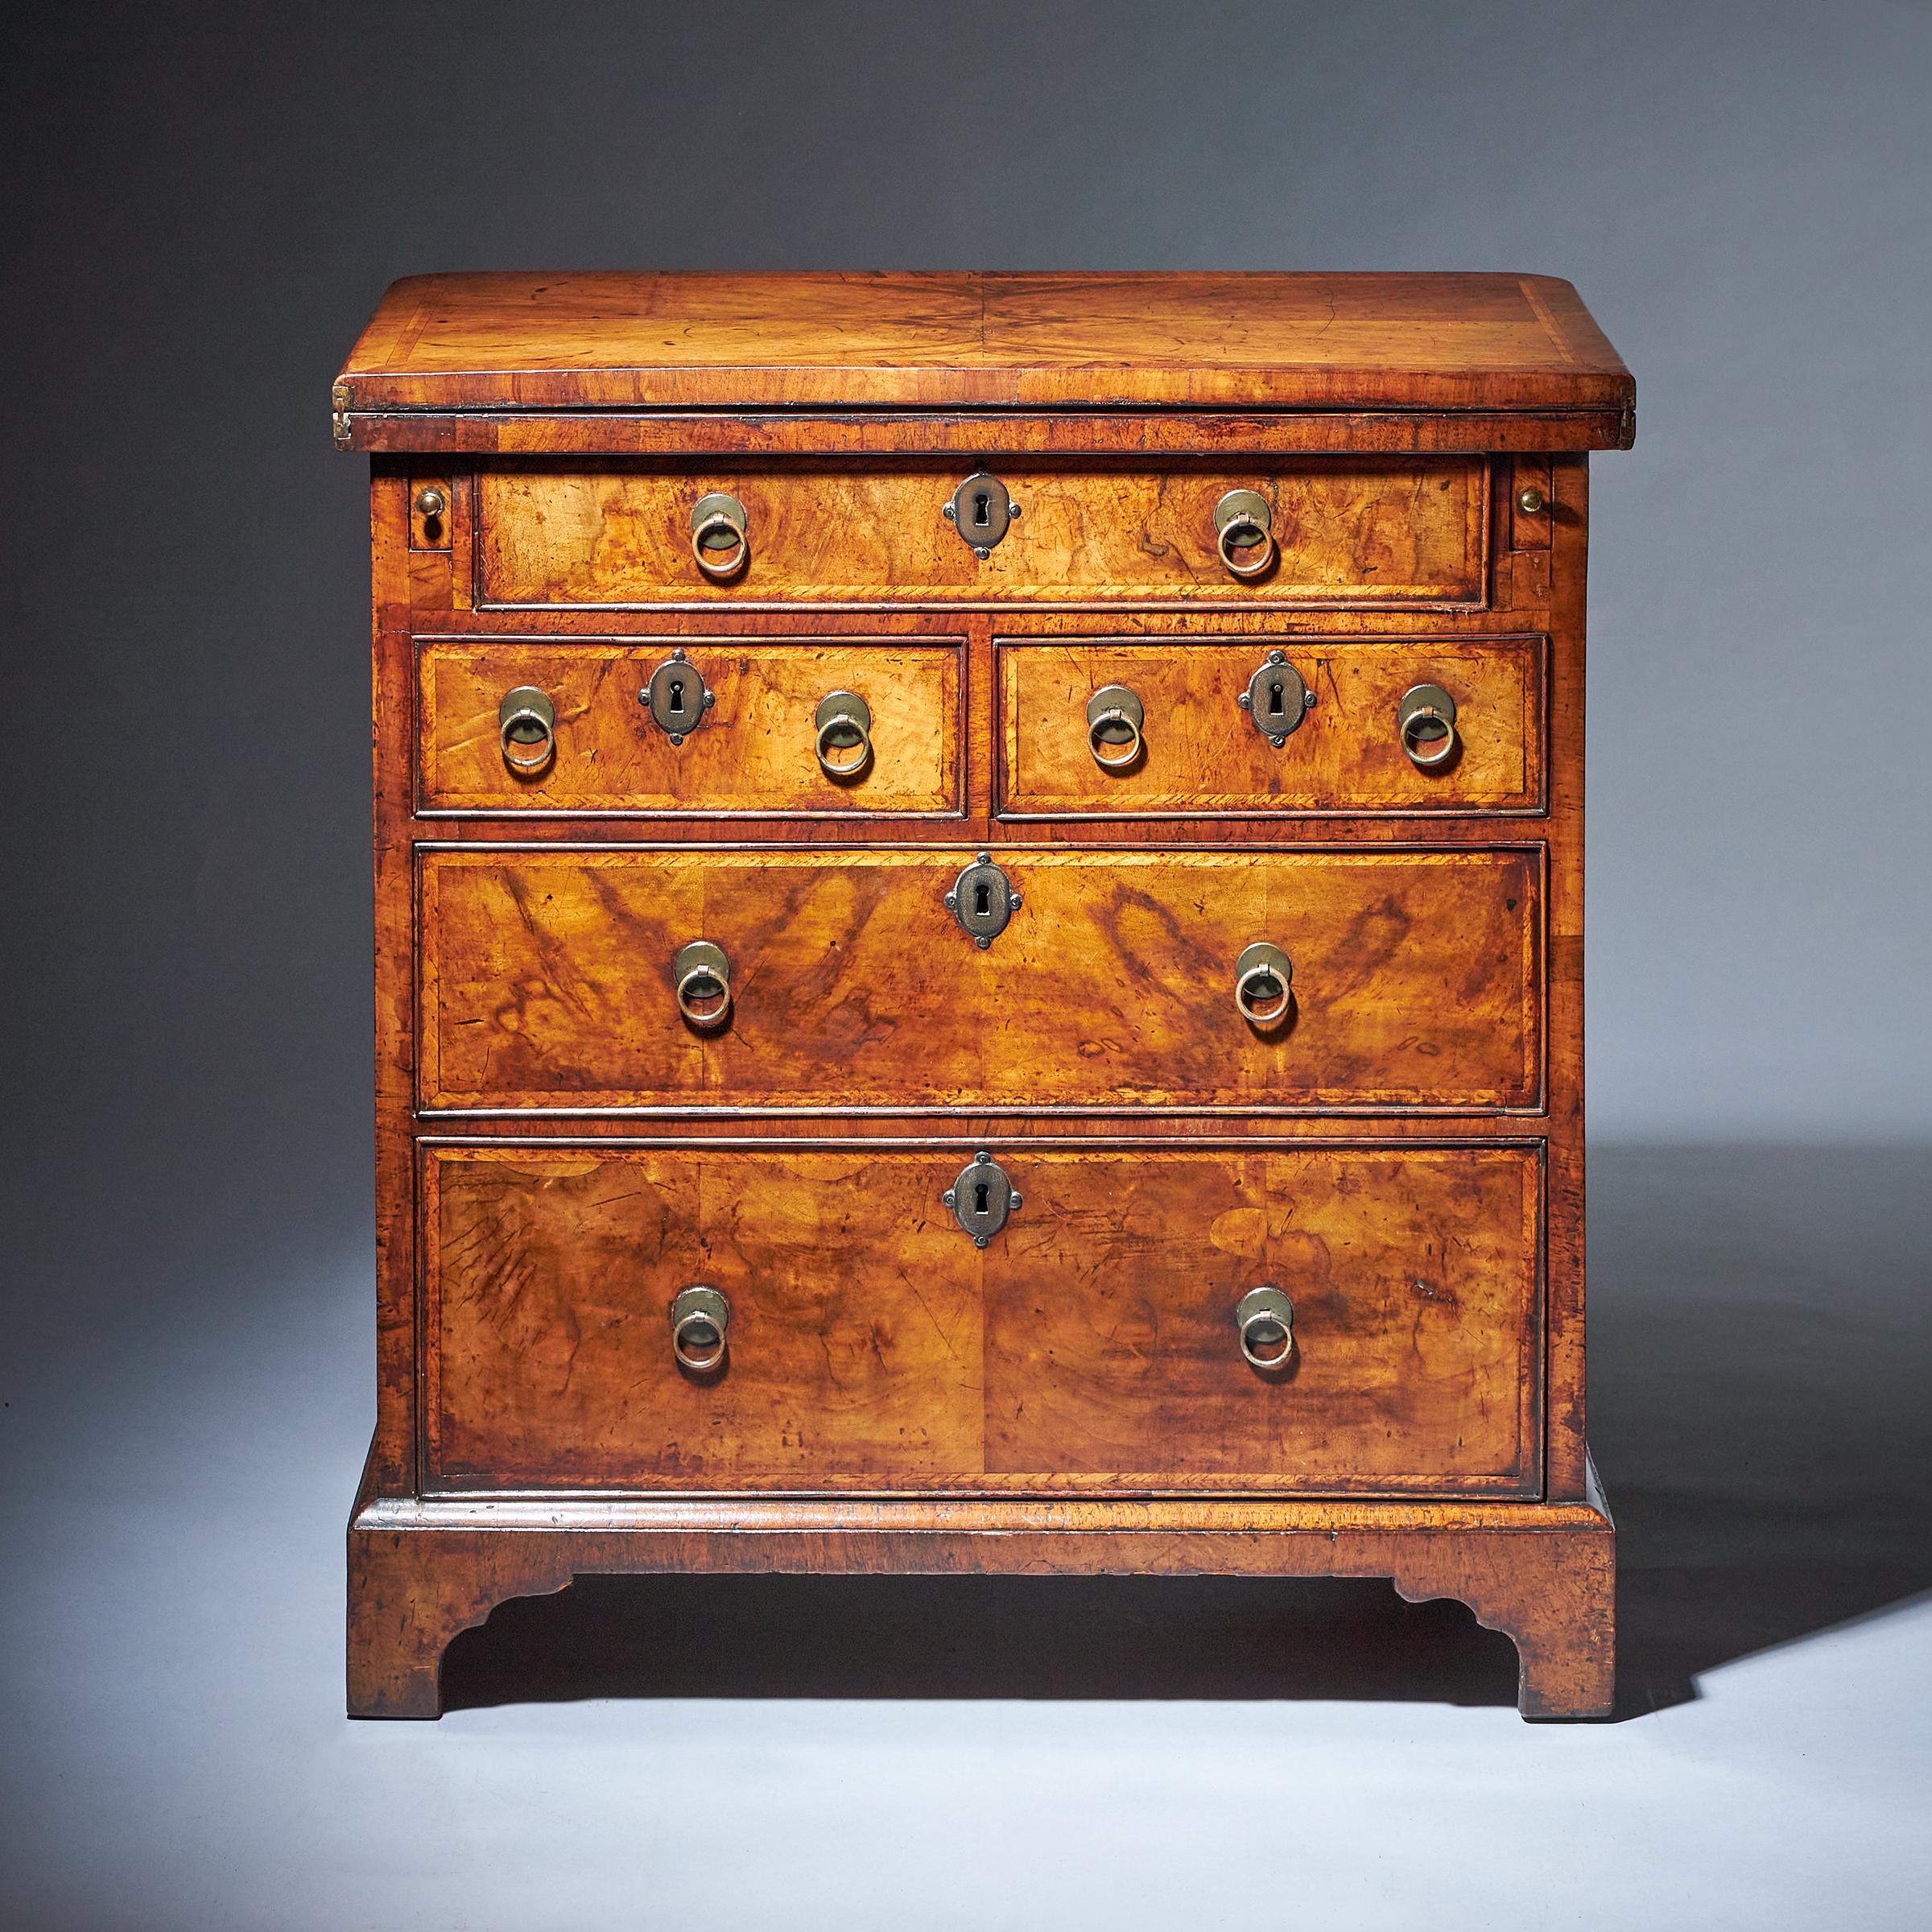 A fine and rare early 18th-century compact George I figured walnut bachelors chest

The quarter veneered feather and crossbanded top opens on original hinges to reveal a veneered interior of six book-matched sections similarly feather and